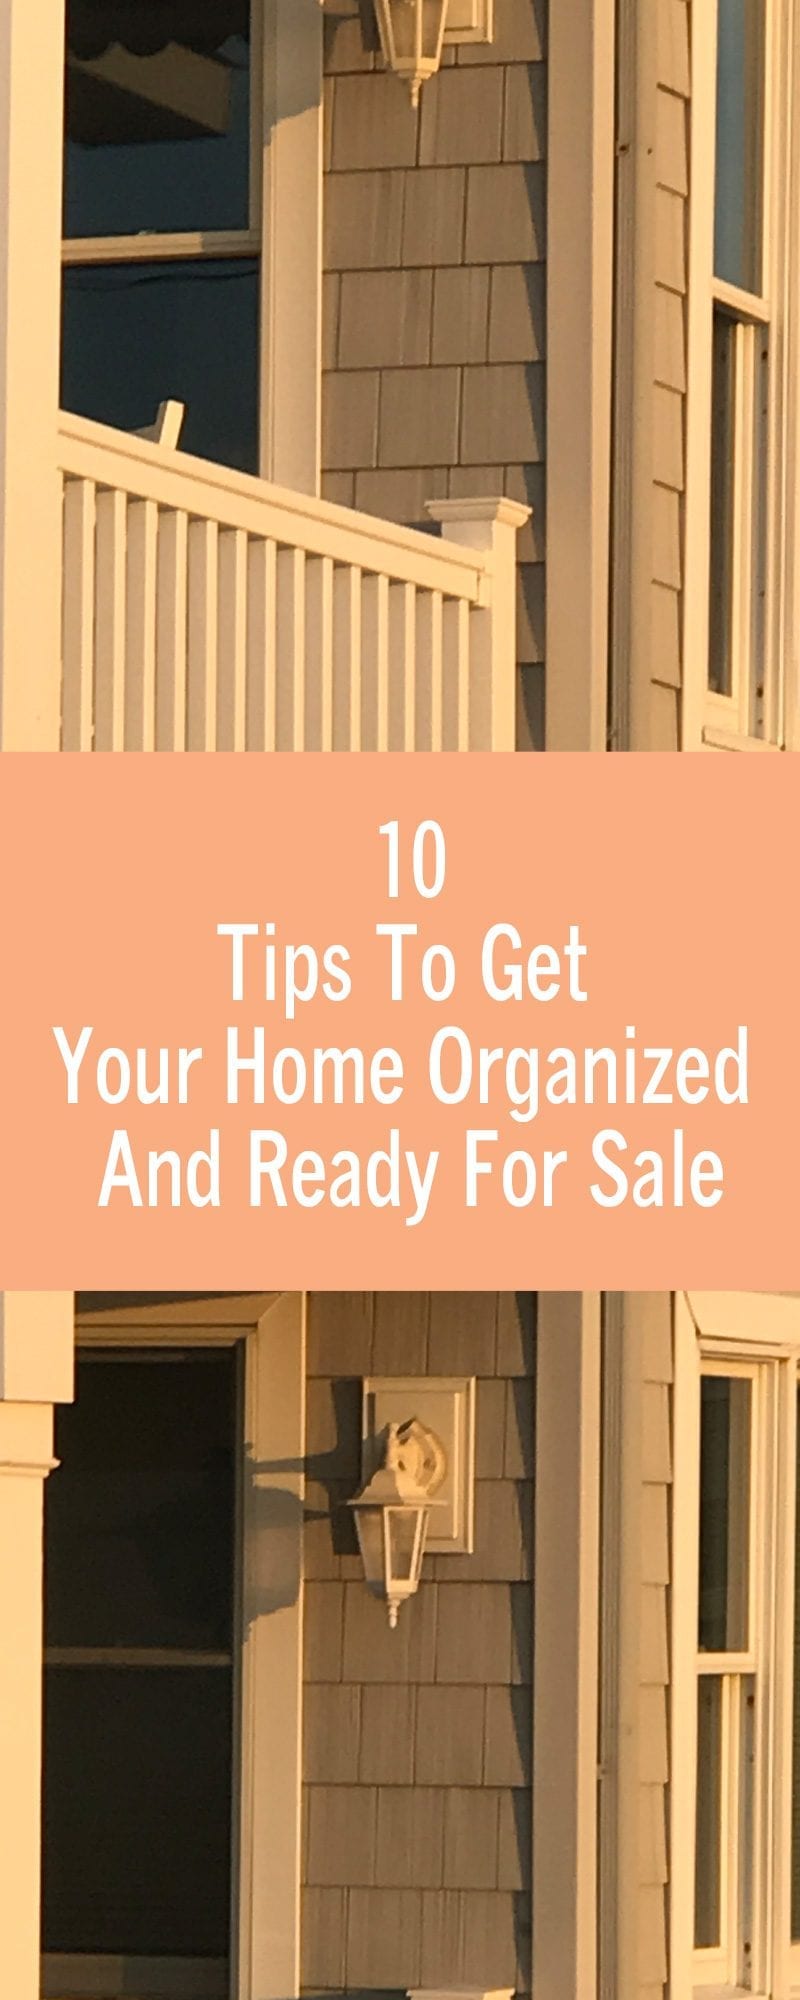 10 Tips To Get Your Home Organized And Ready For Sale